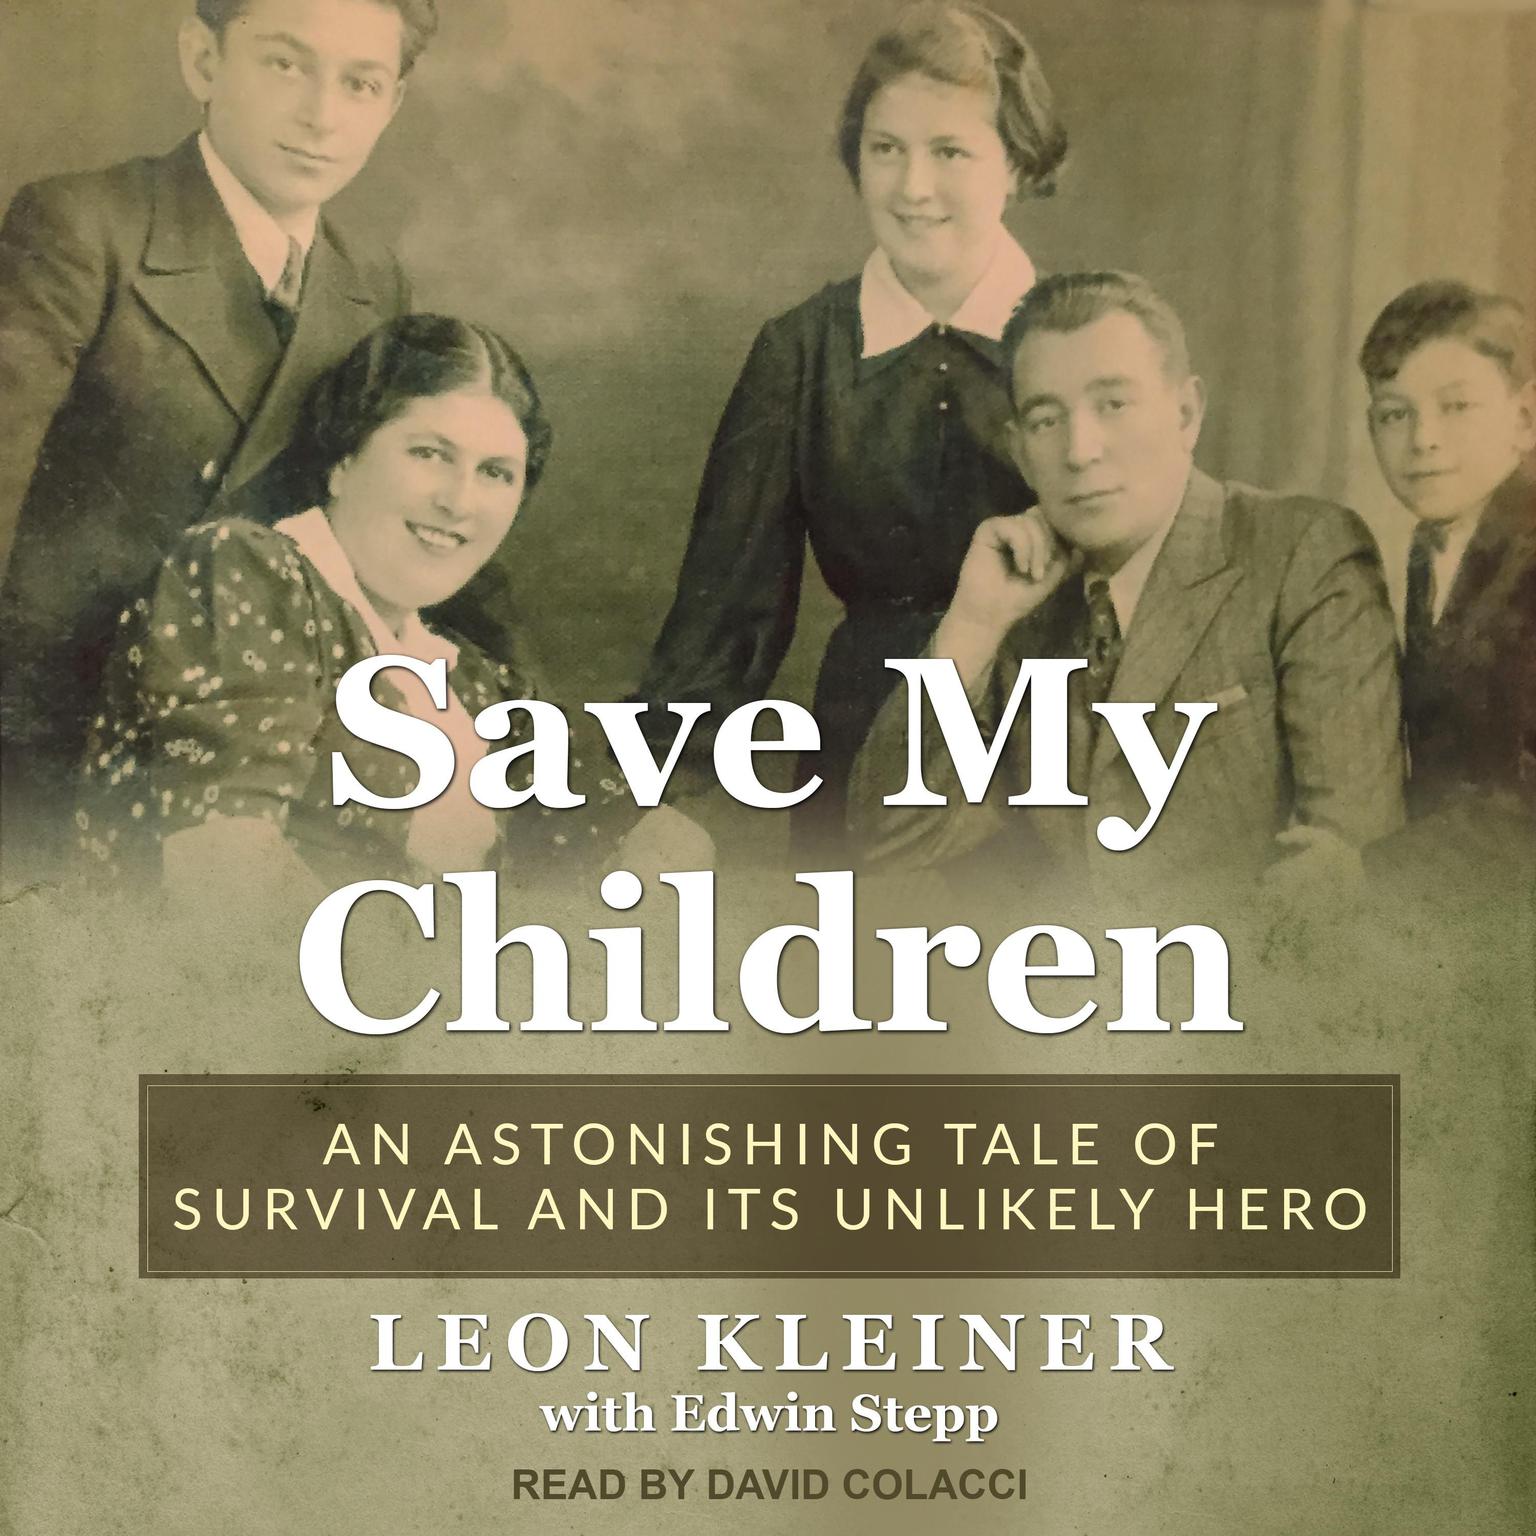 Save my Children: An Astonishing Tale of Survival and its Unlikely Hero Audiobook, by Leon Kleiner